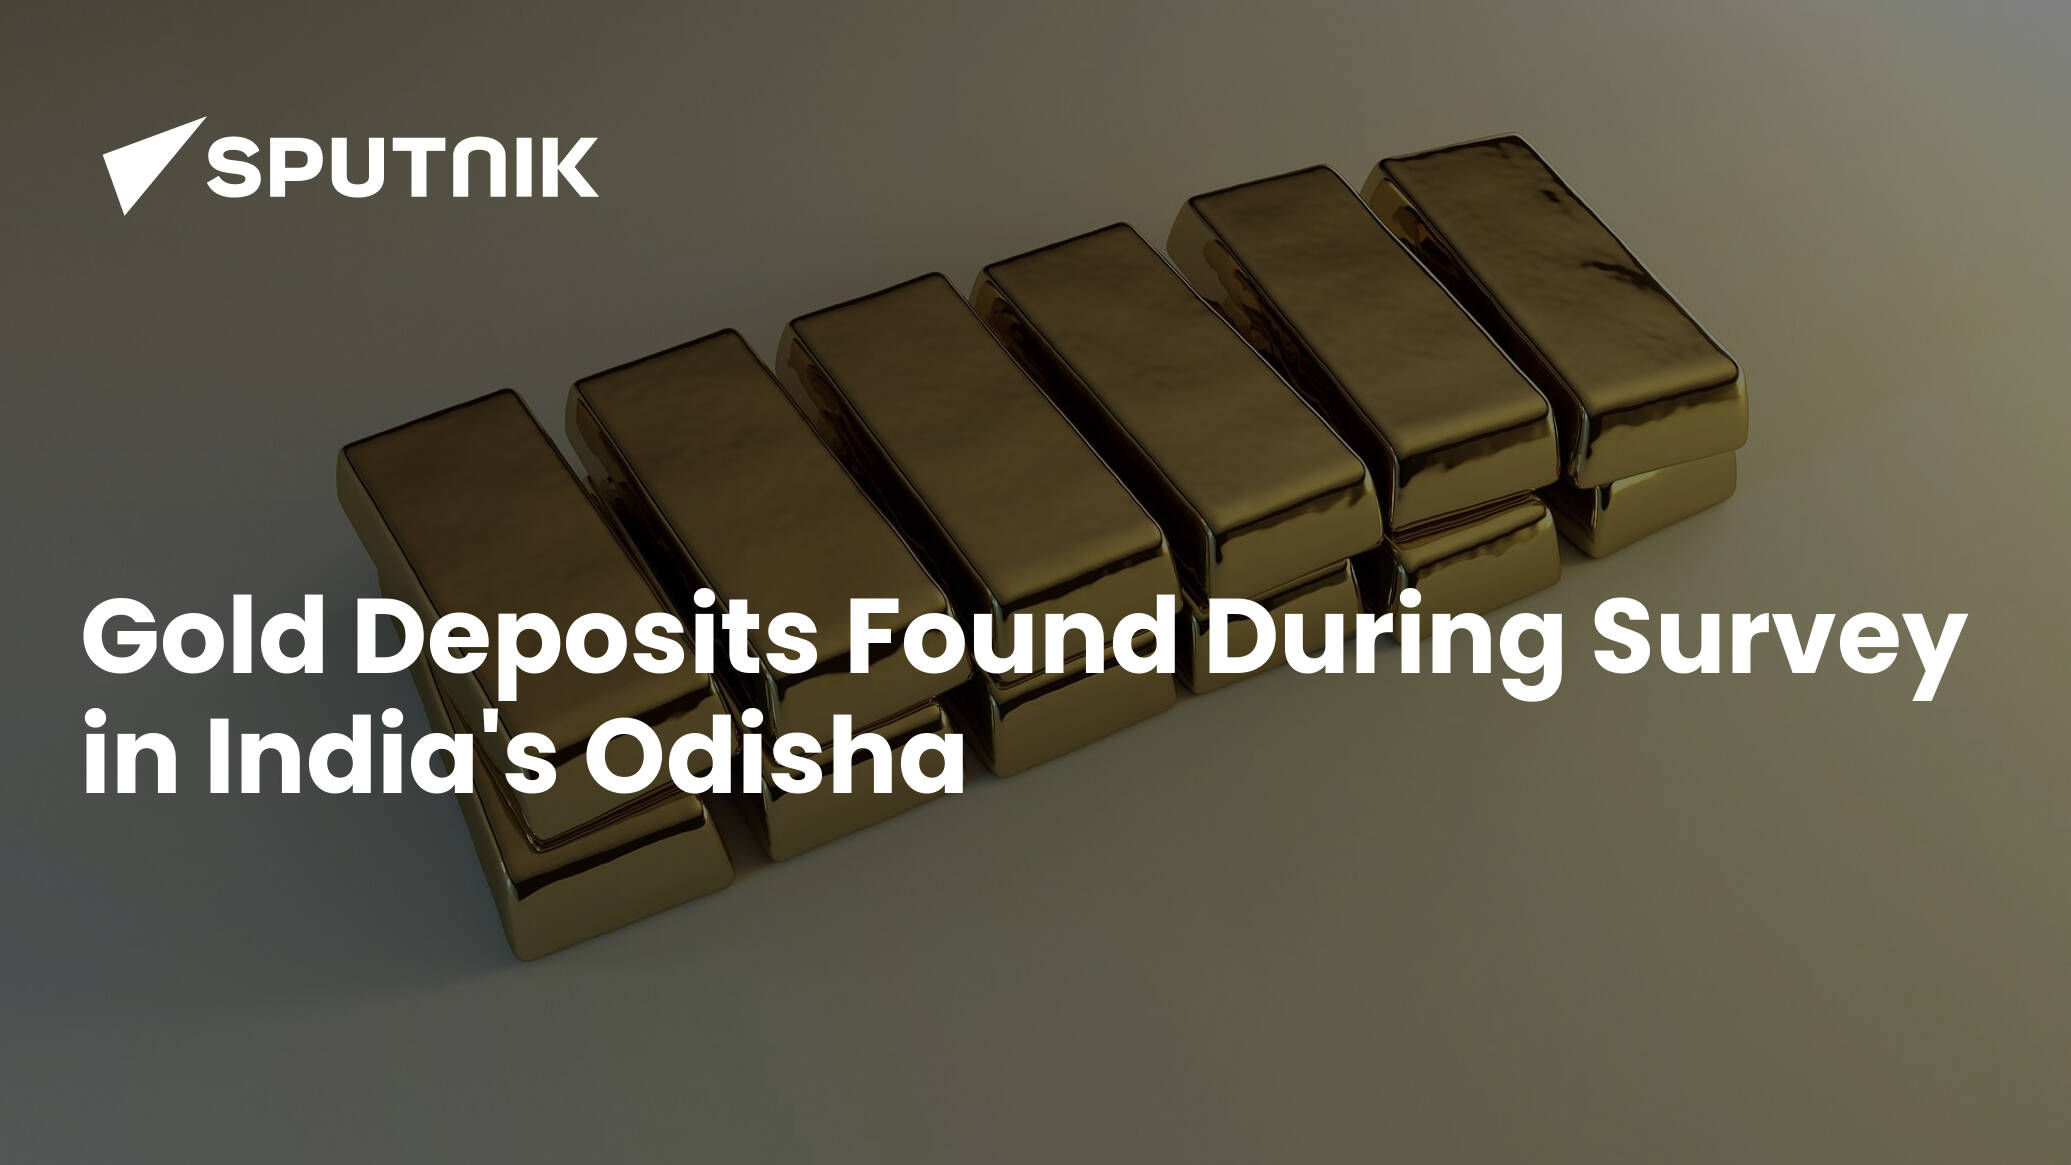 Jackpot! Geological Survey of India finds gold deposits in Odisha